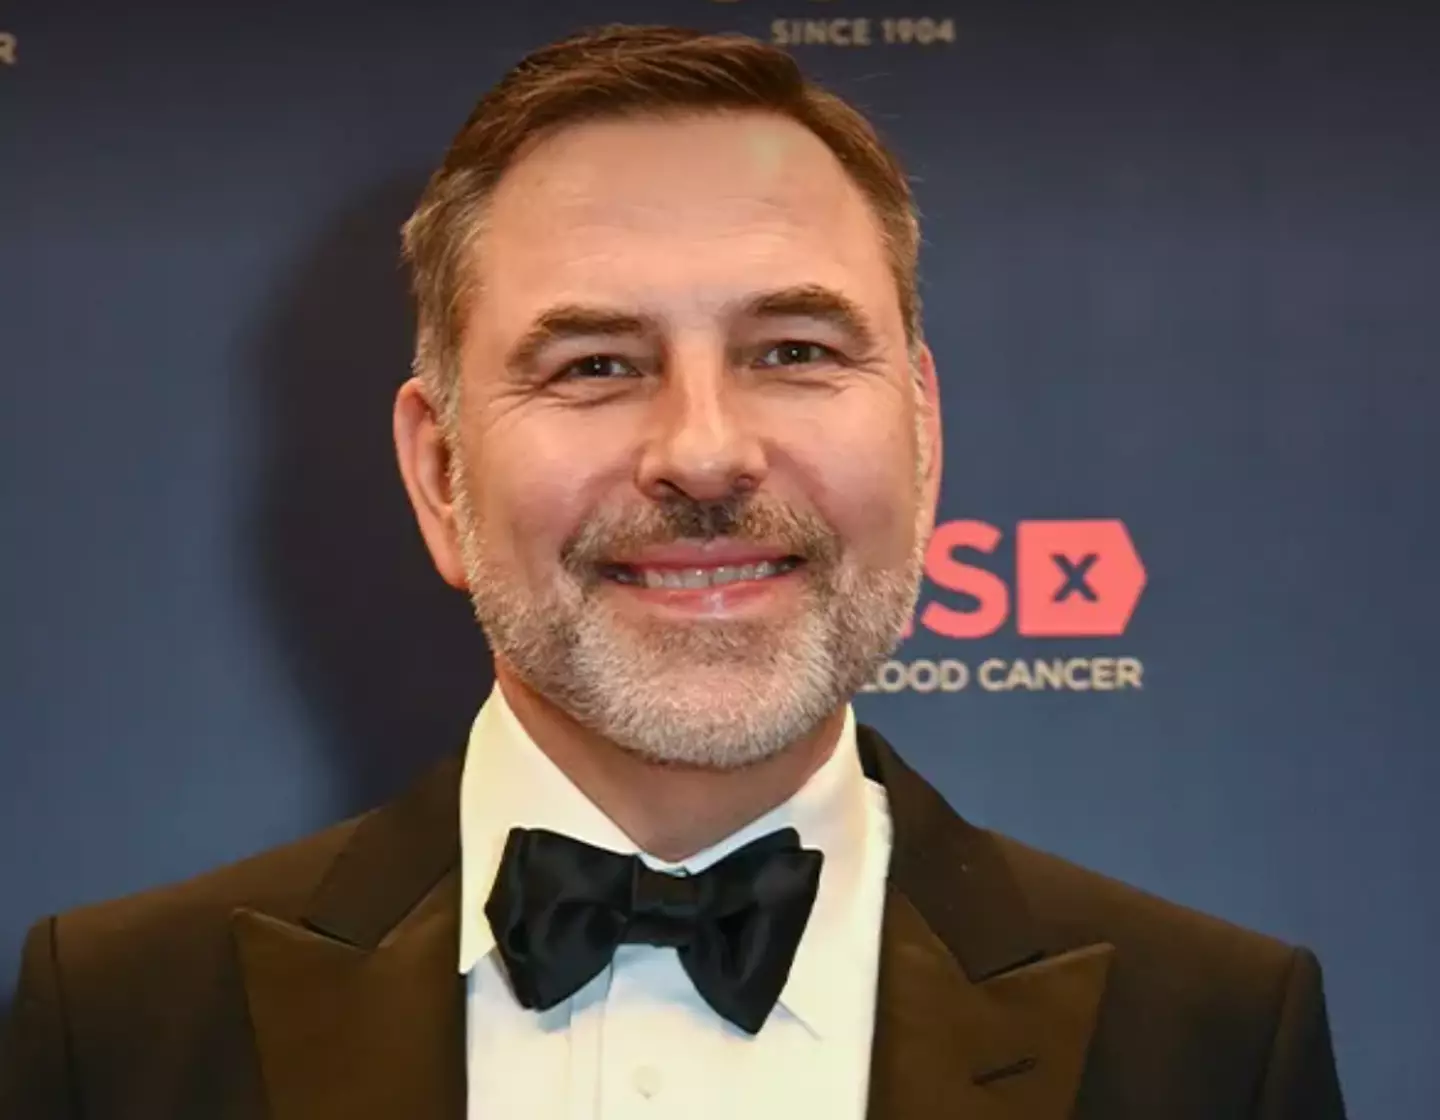 David Walliams later apologised for his comments.